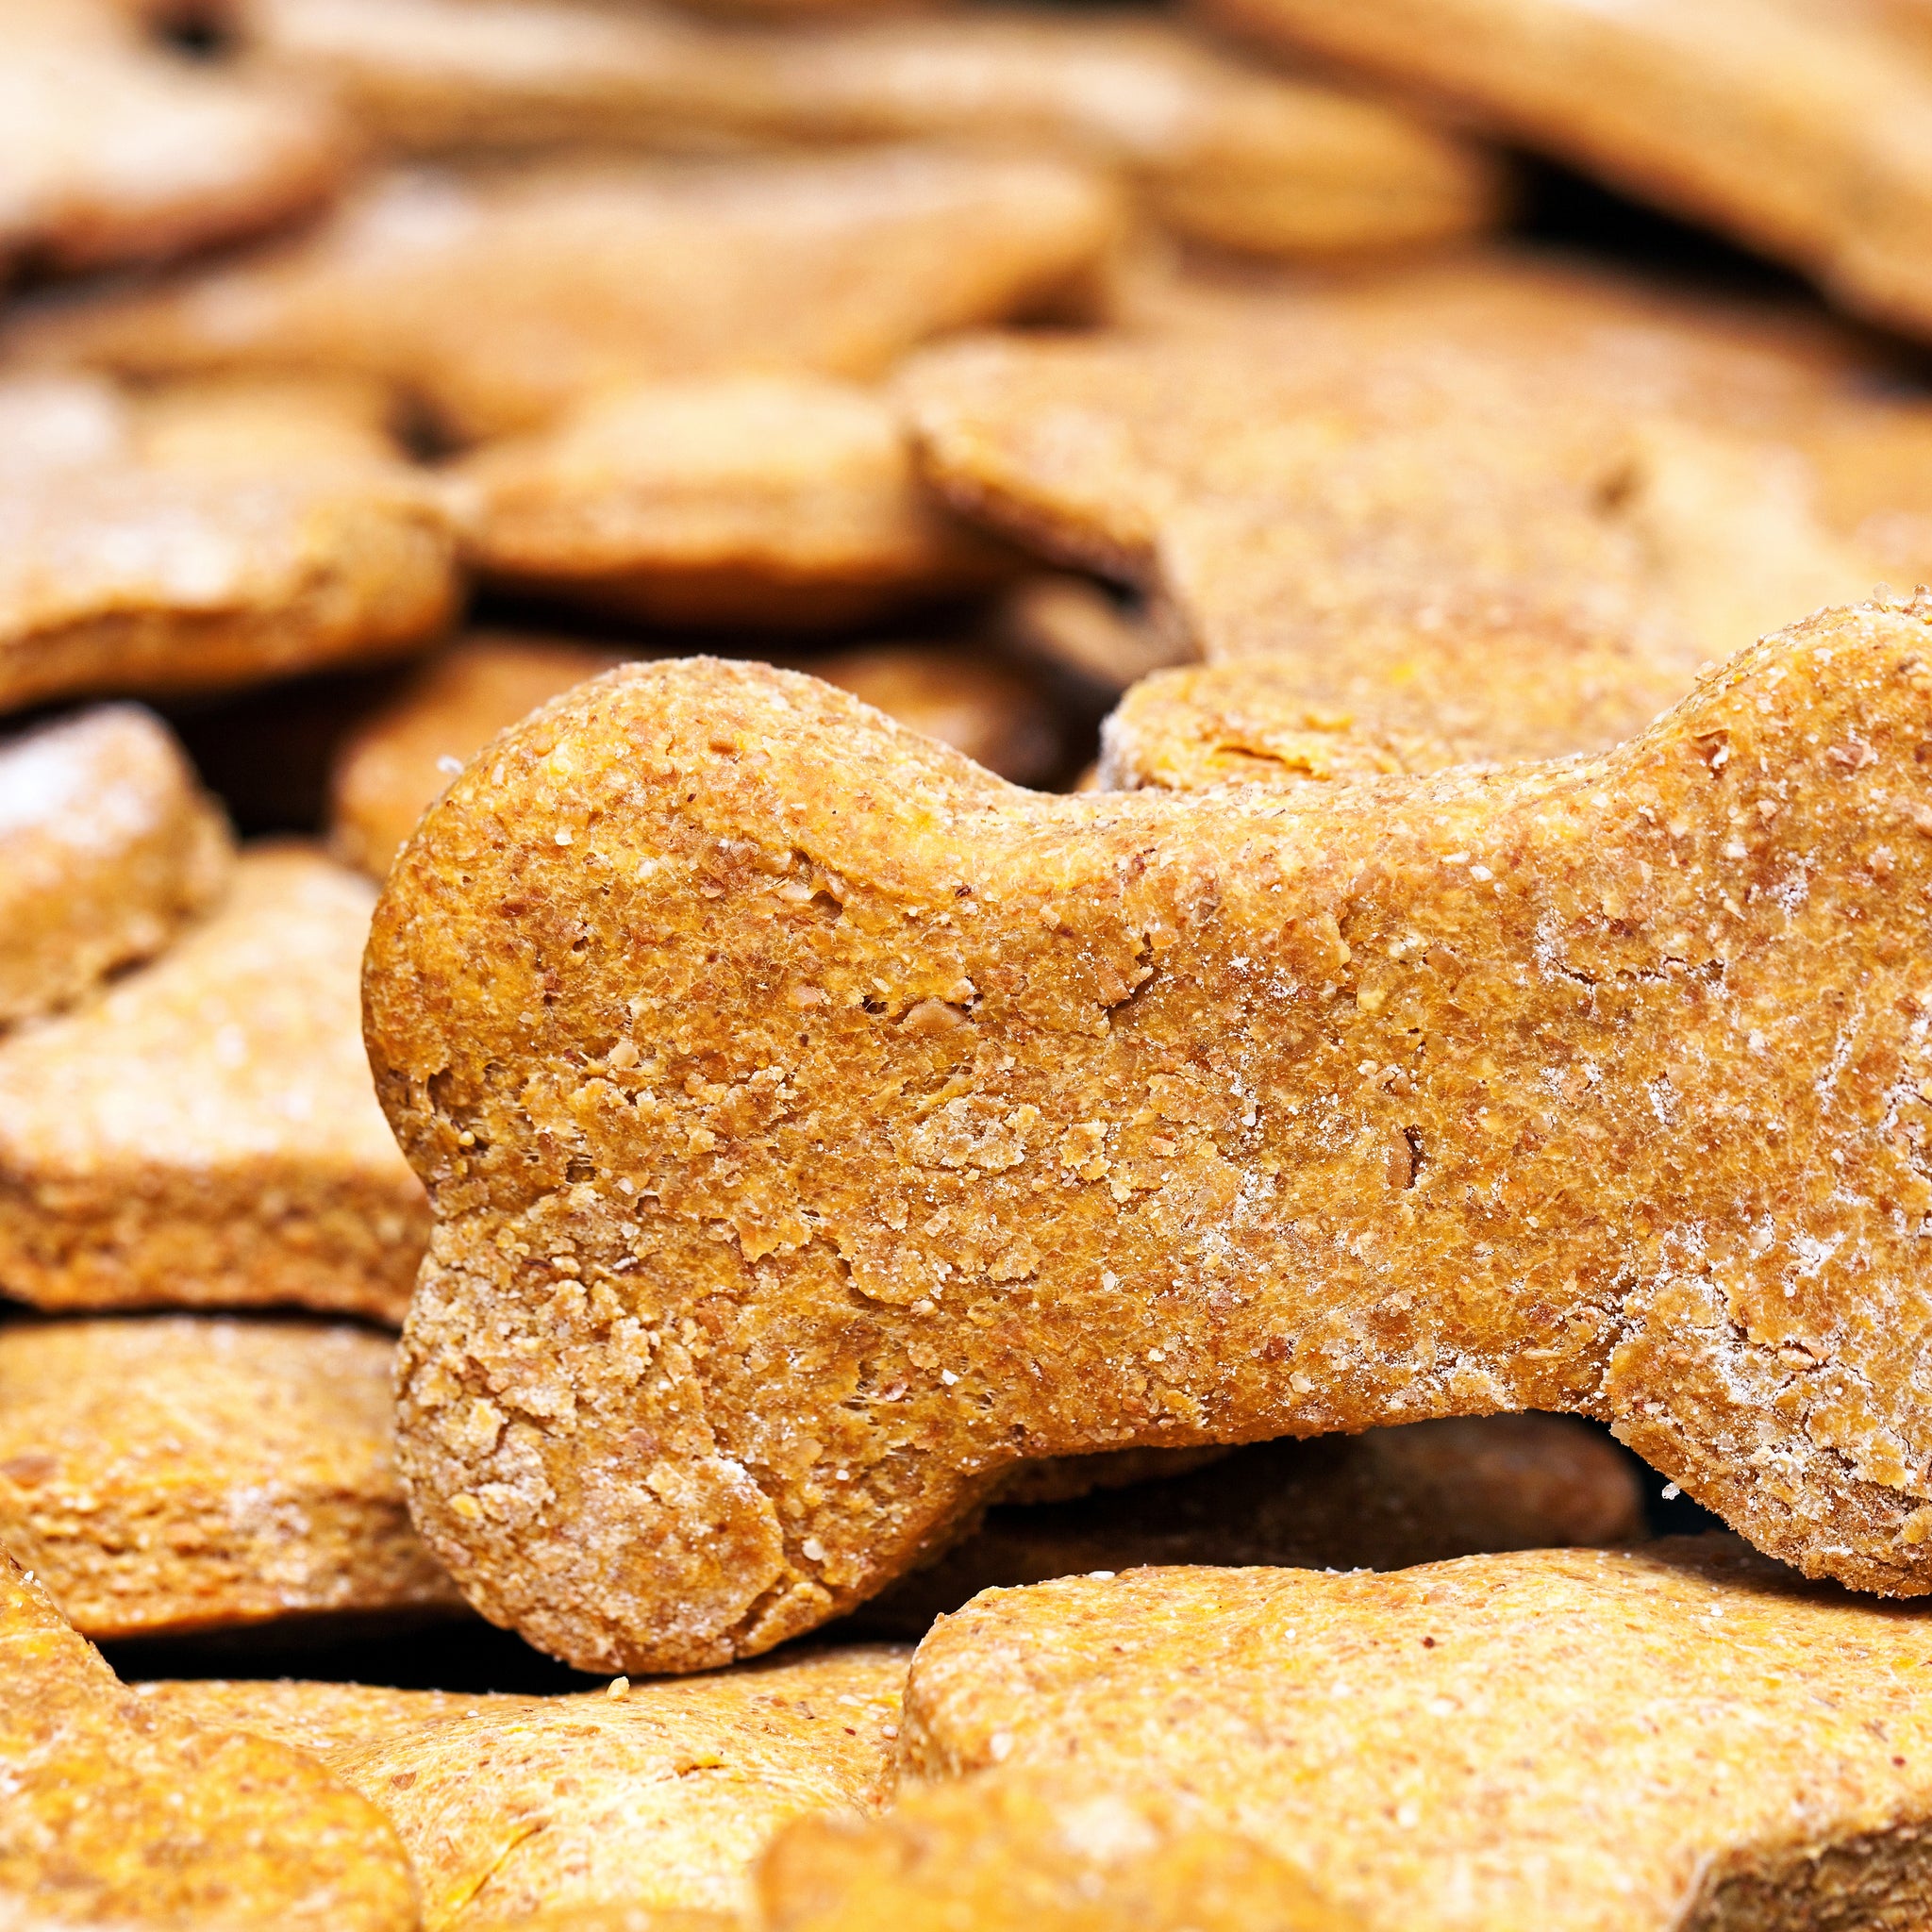 National Dog Biscuit Day - February 23rd